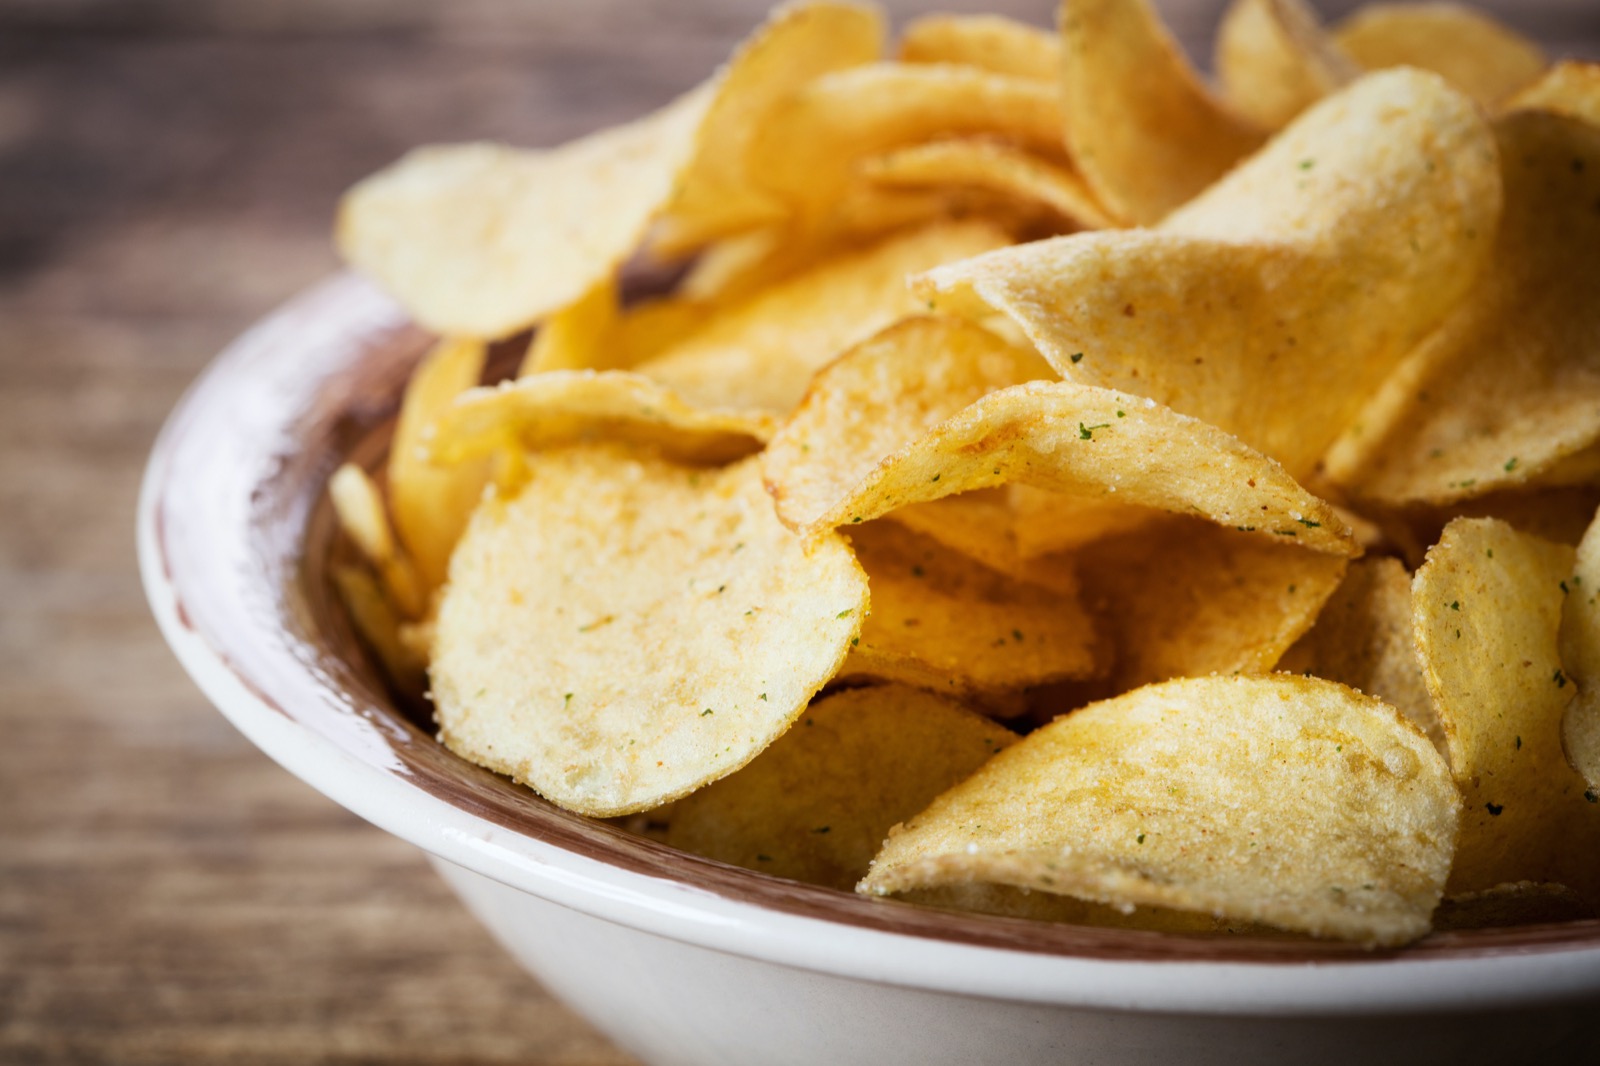 🥔 If You’ve Eaten 20/28 of These Foods, You’re a Real Potato Lover Potato chips